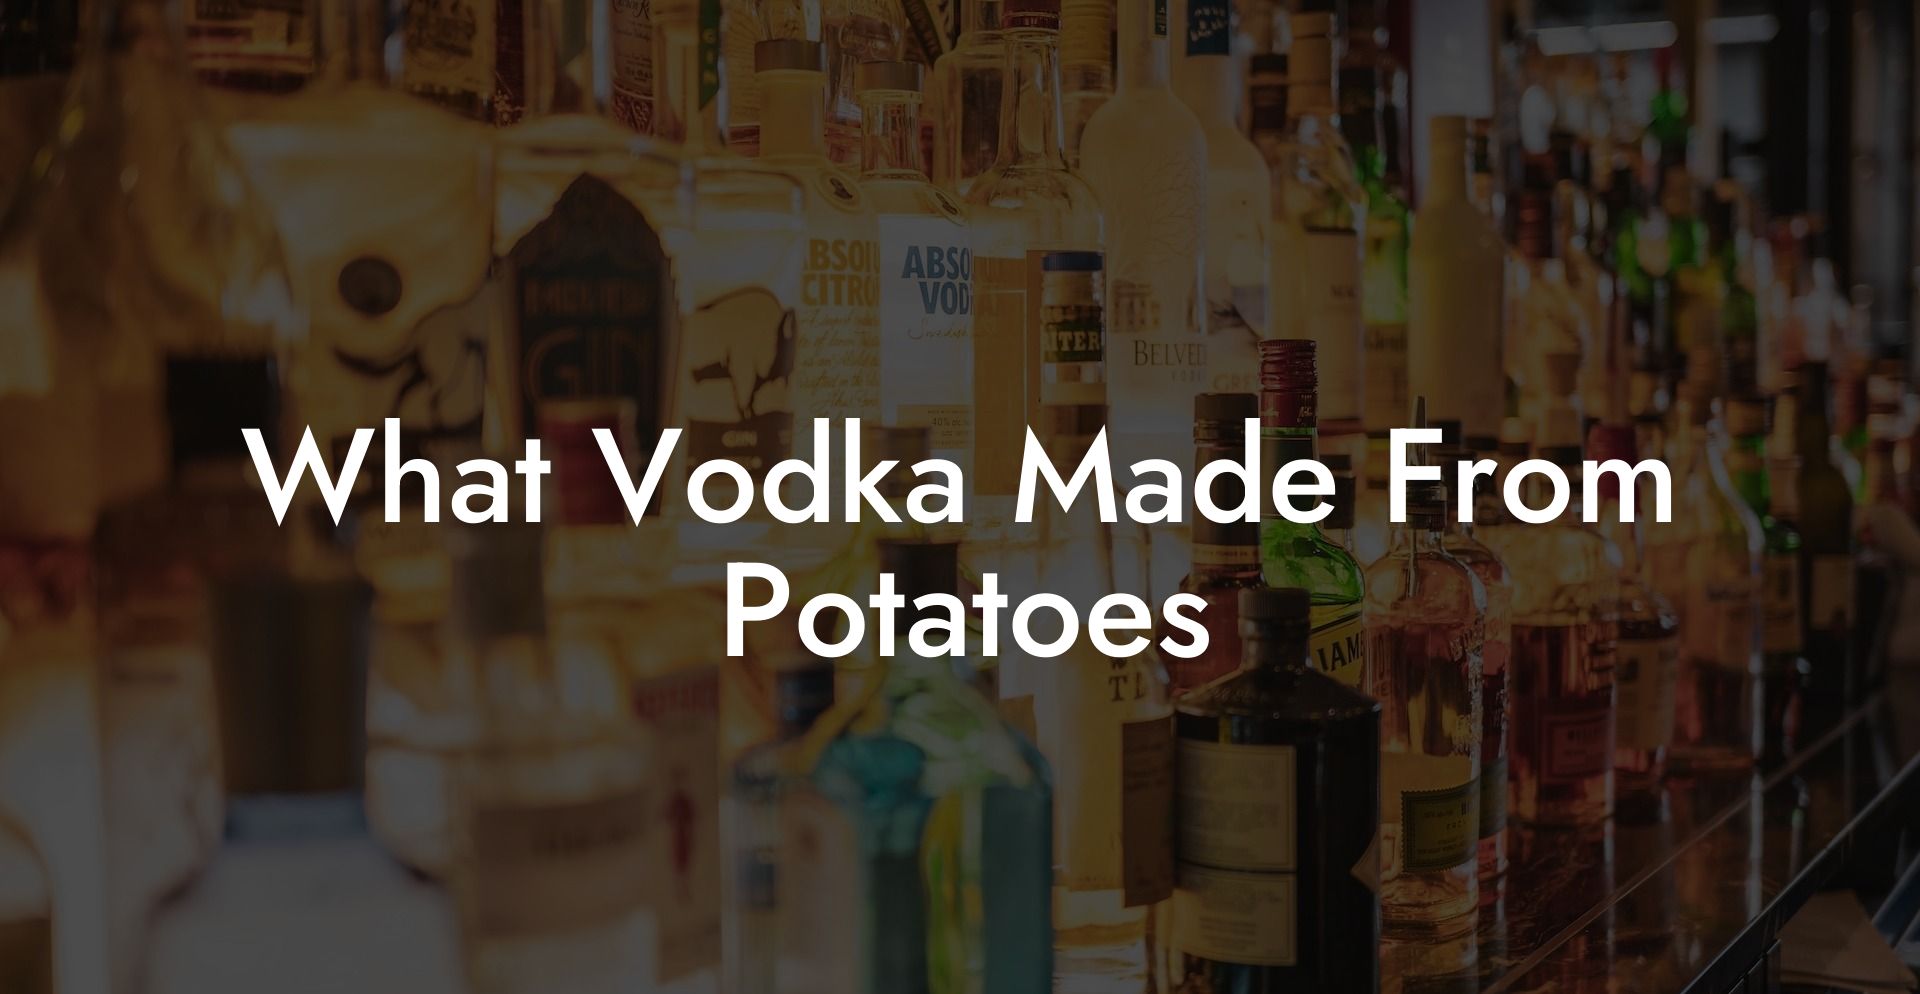 What Vodka Made From Potatoes